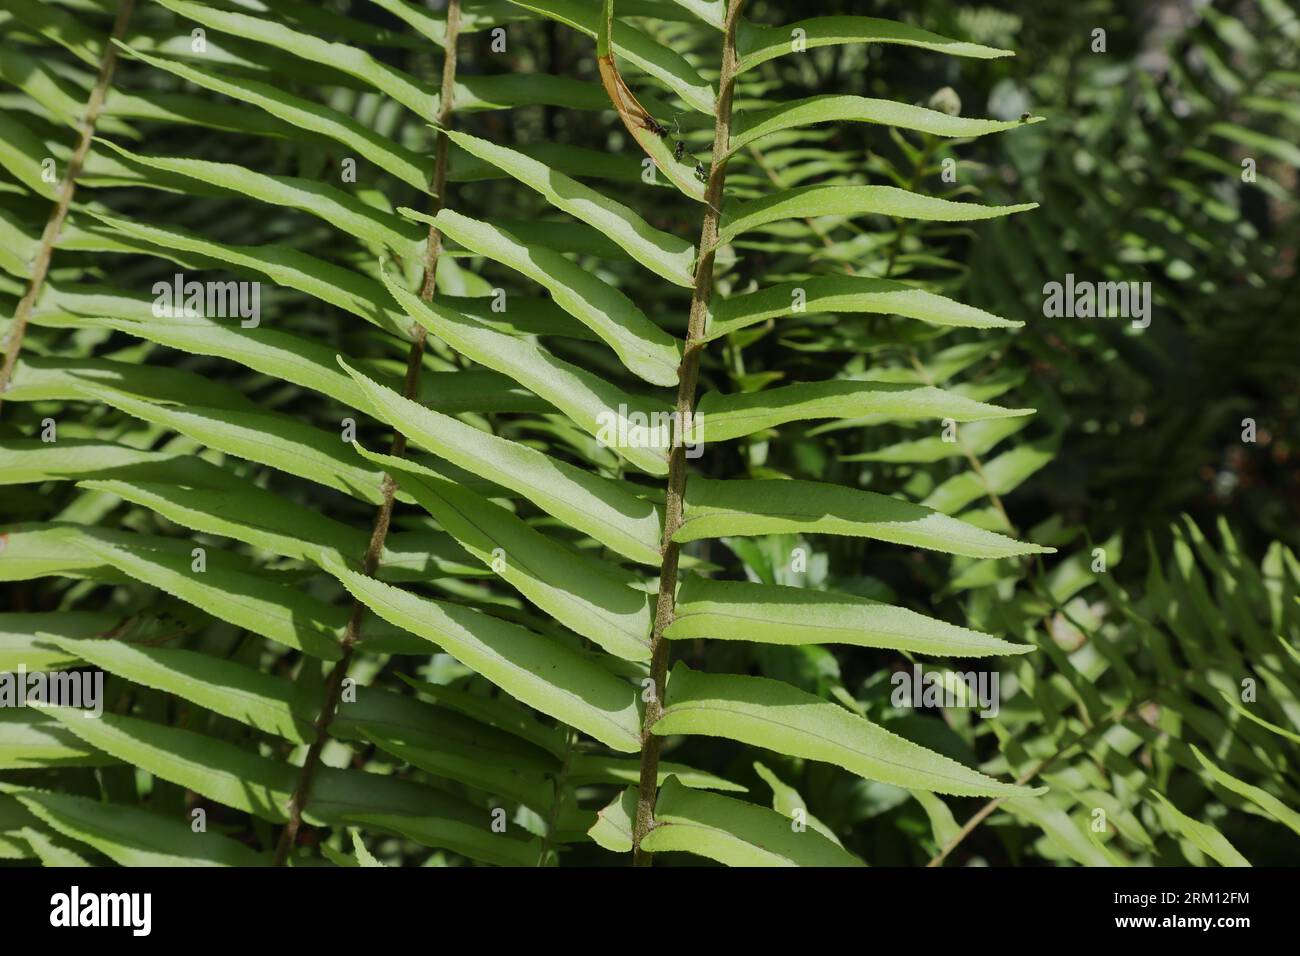 Close up view of a frond leaf belongs to Nephrolepis fern species is in direct sunlight Stock Photo